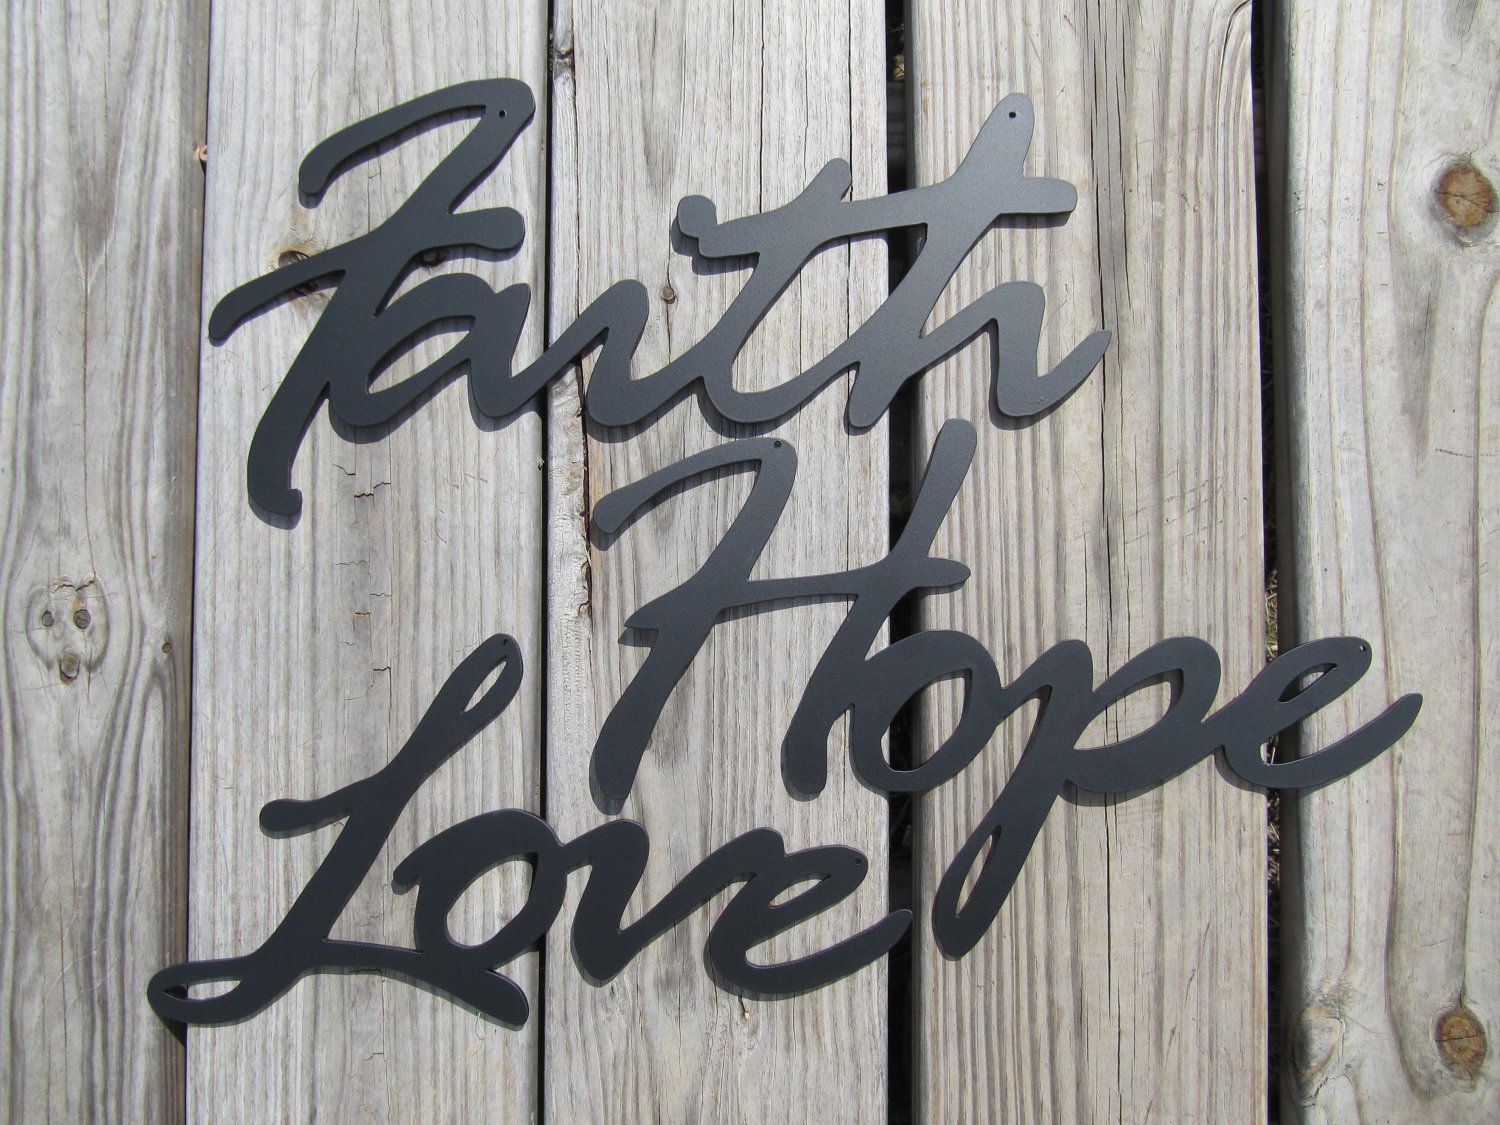 Widely Used Faith Hope Love Metal Art Wall Decorapollometalart On Etsy With Regard To Faith, Hope, Love Raised Sign Wall Decor (View 2 of 20)